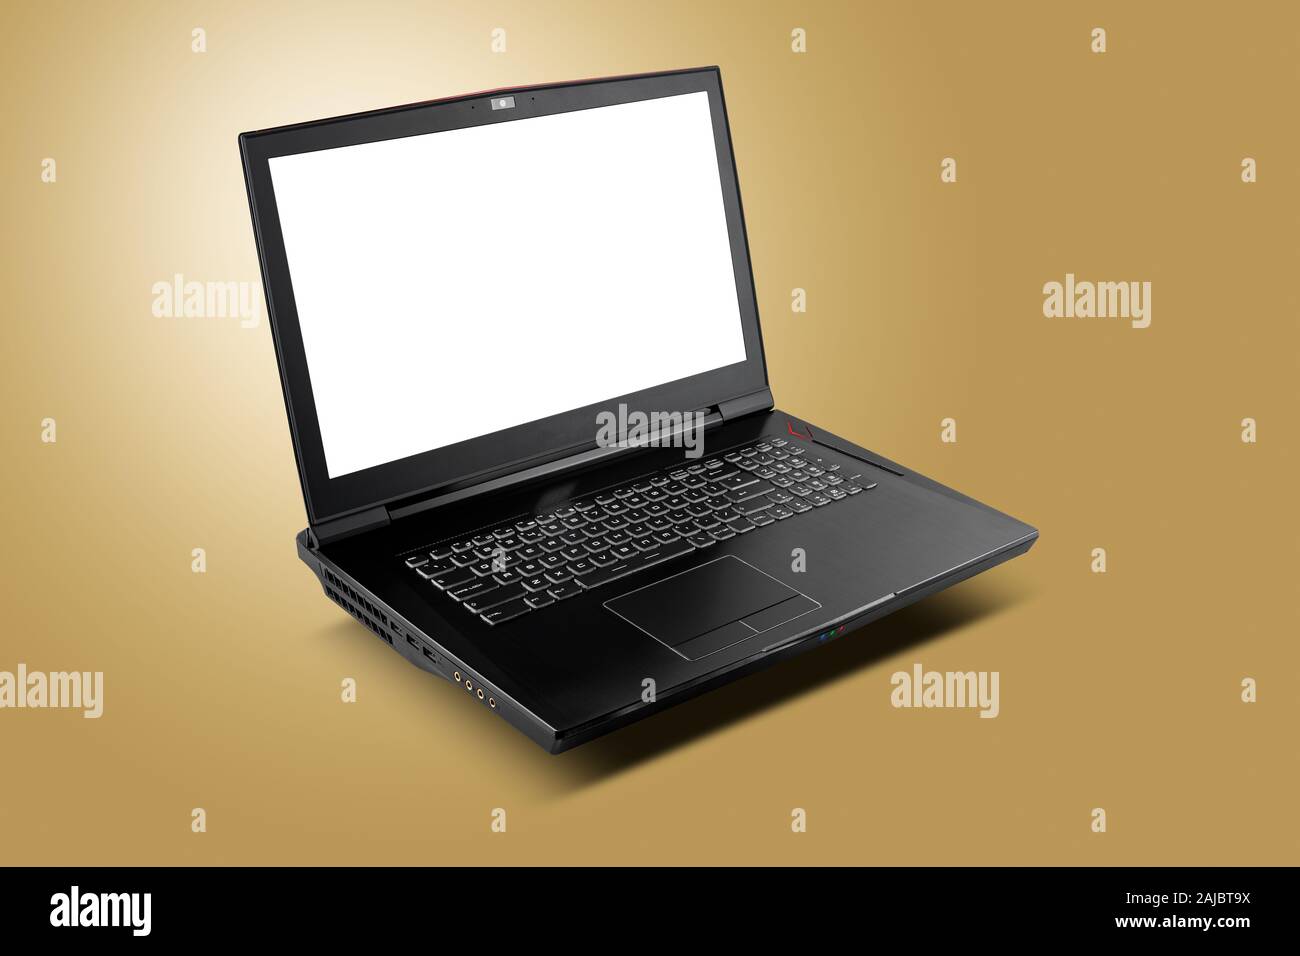 Front view of gaming laptop on golden yellow background. Laptop designed for gamers or professional players or 3d rendering Stock Photo